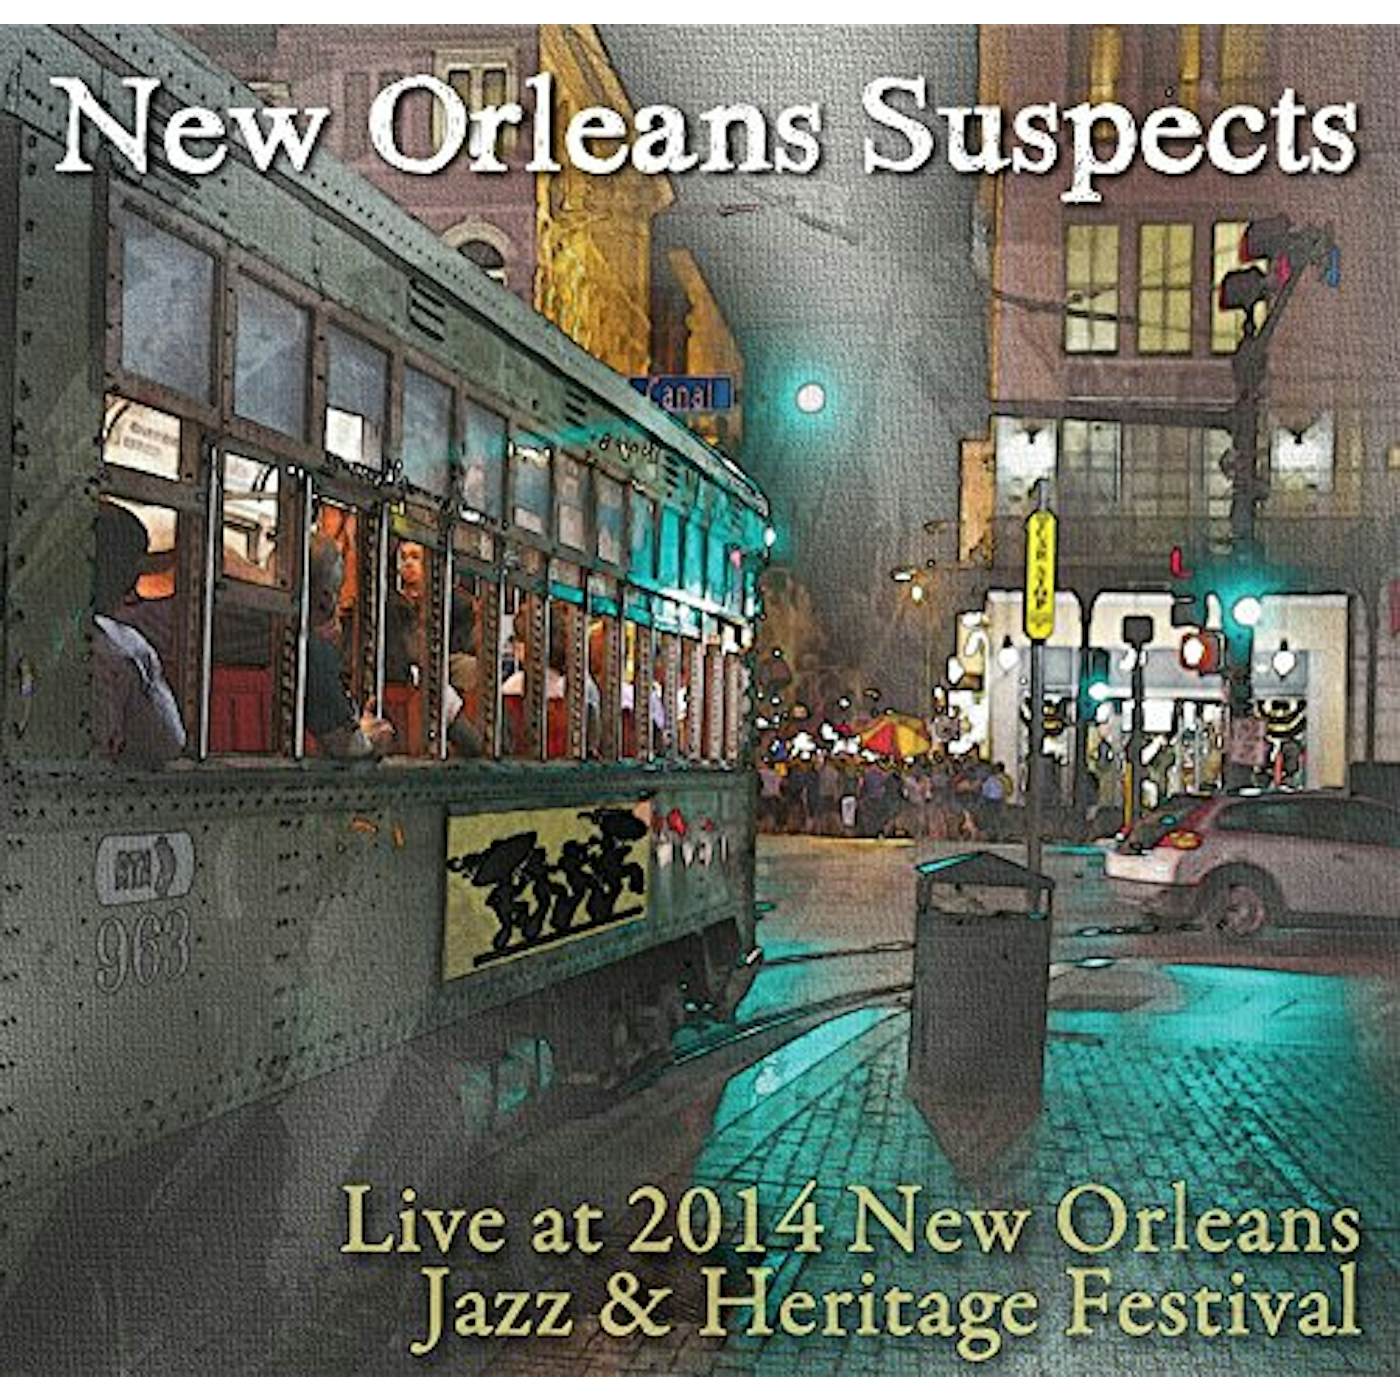 The New Orleans Suspects LIVE AT JAZZ FEST 2014 CD